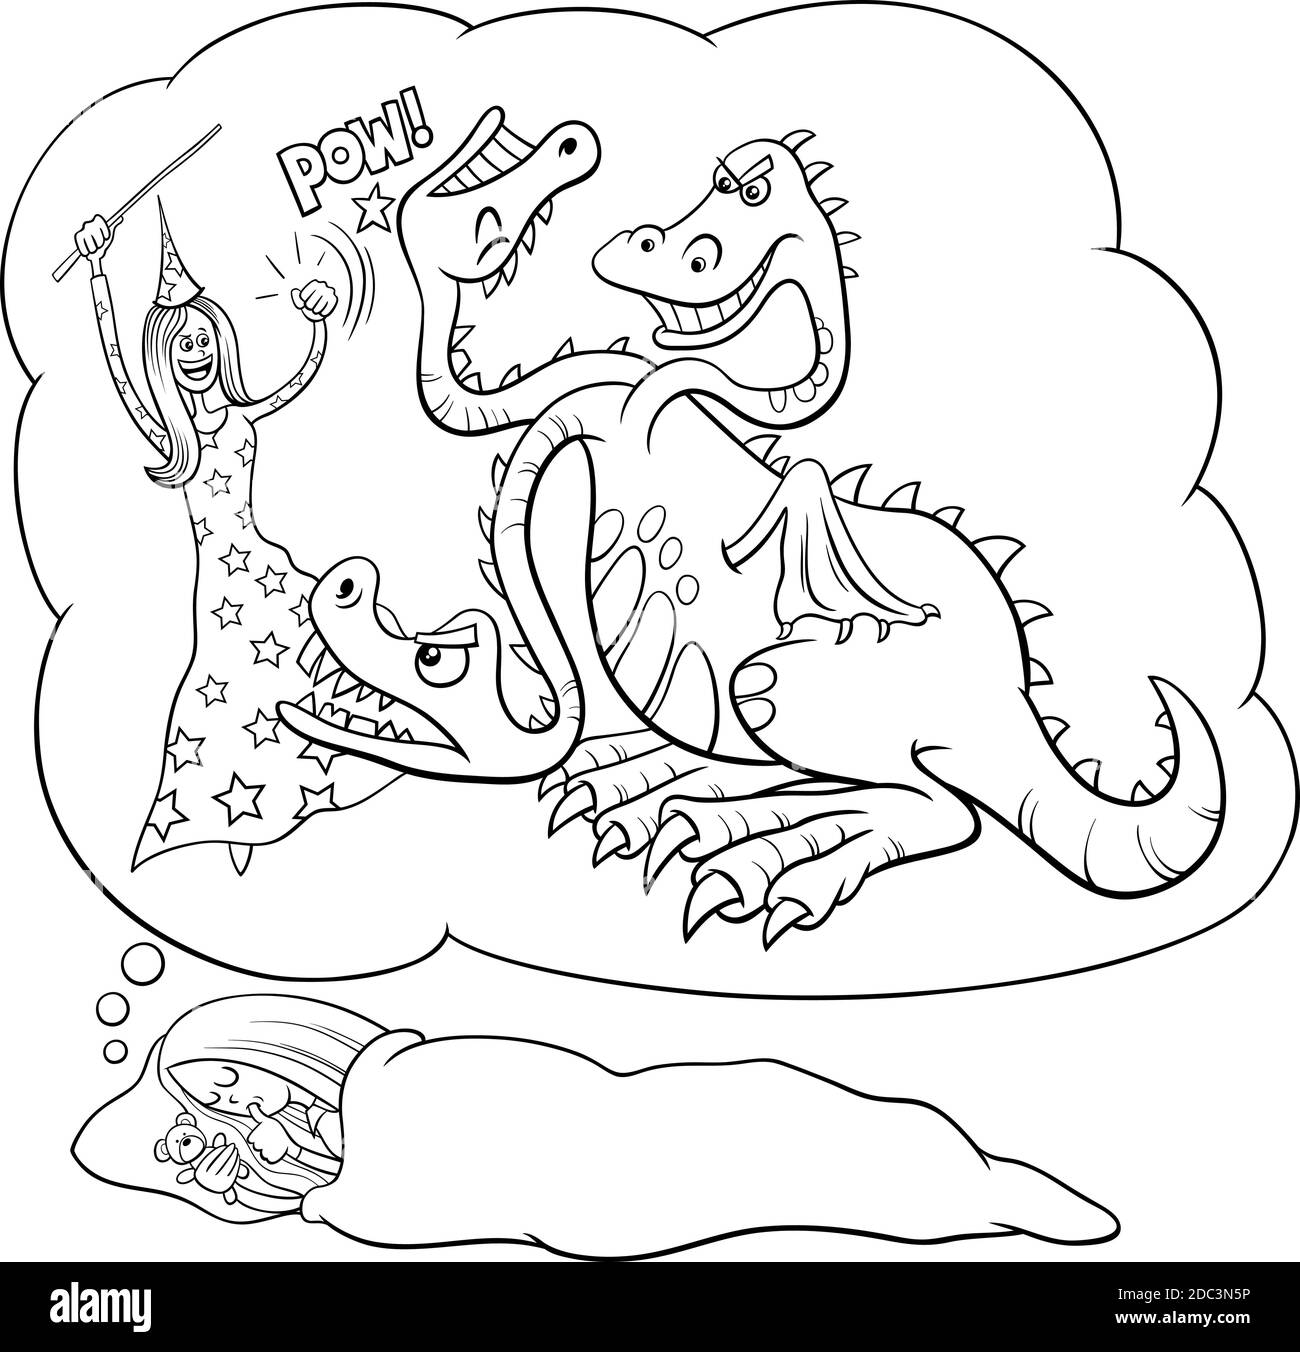 Black and white cartoon illustration of sleeping young girl dreaming about defeating the dragon coloring book page Stock Vector